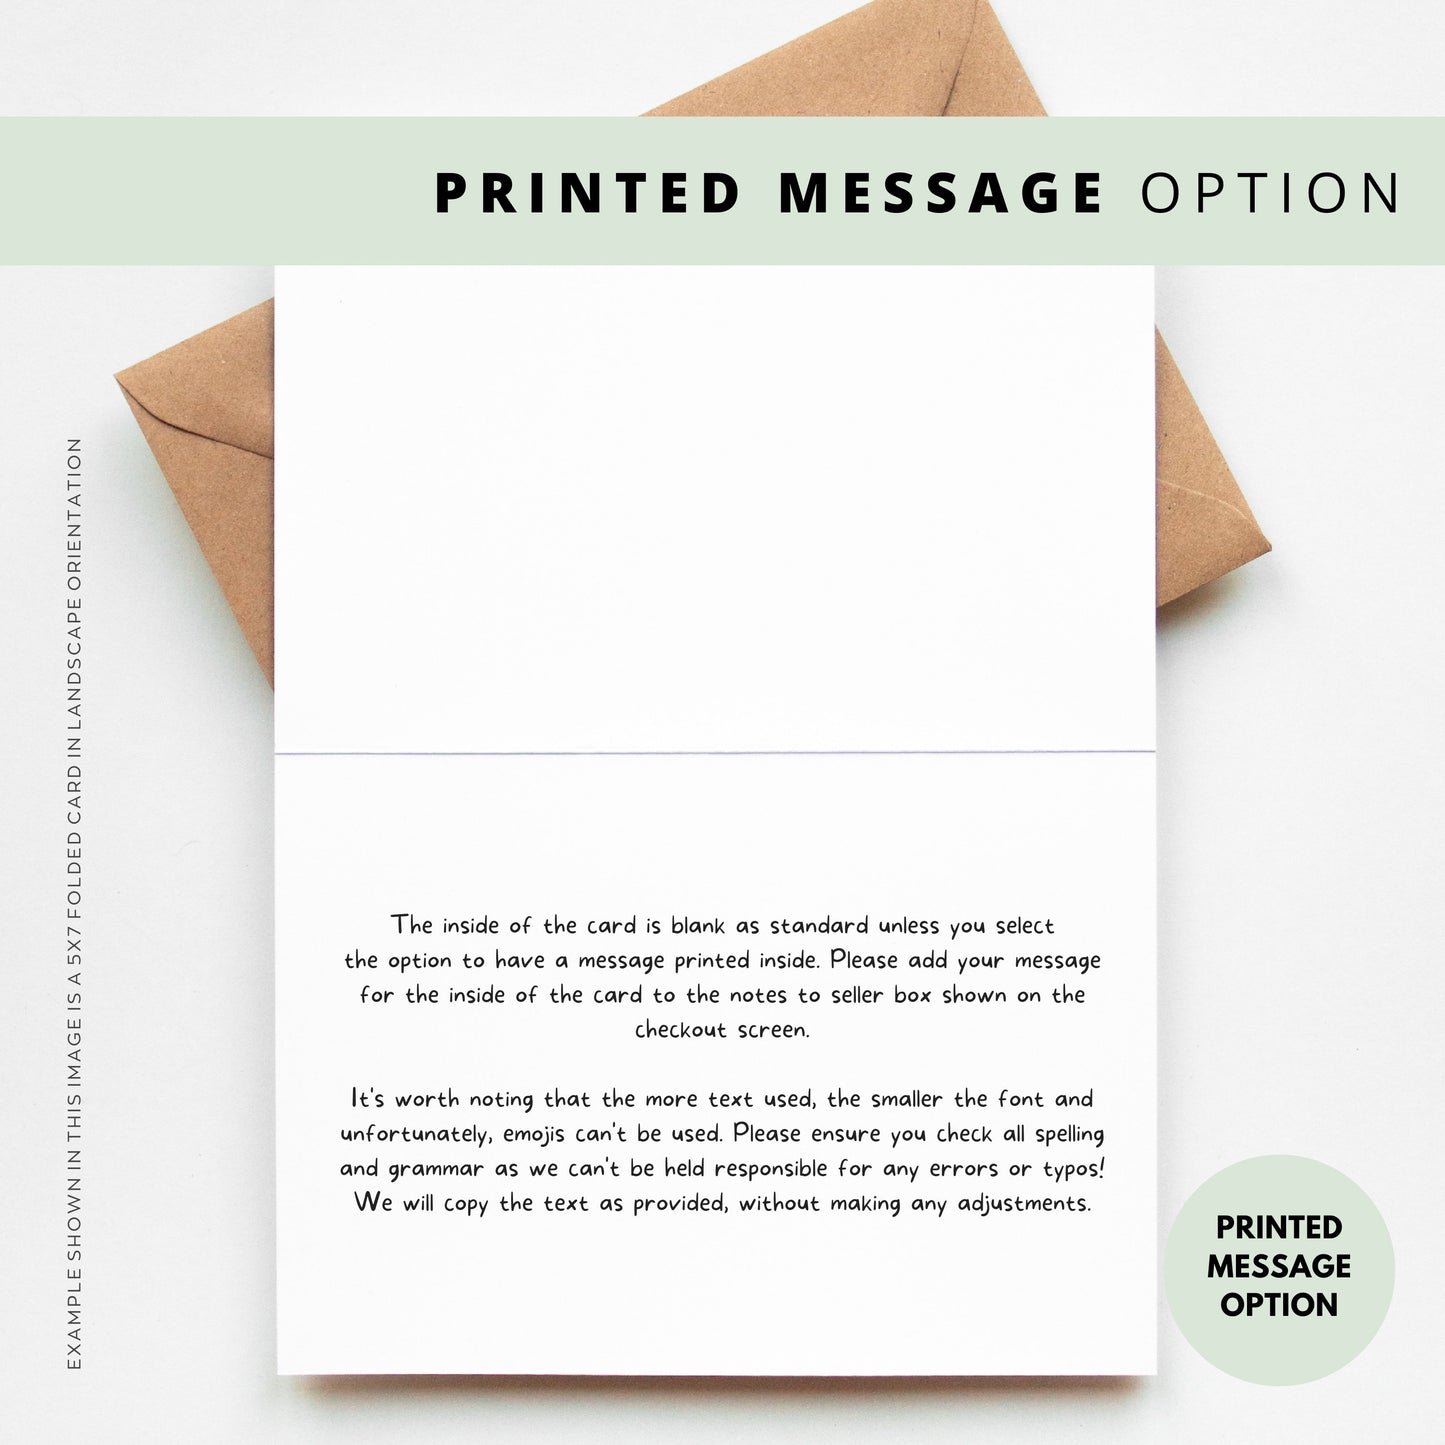 Son In Law Wedding Card, Parents of the Bride Wedding Card, Parents of the Groom Wedding Card, Wedding Party Thank You Card - #228